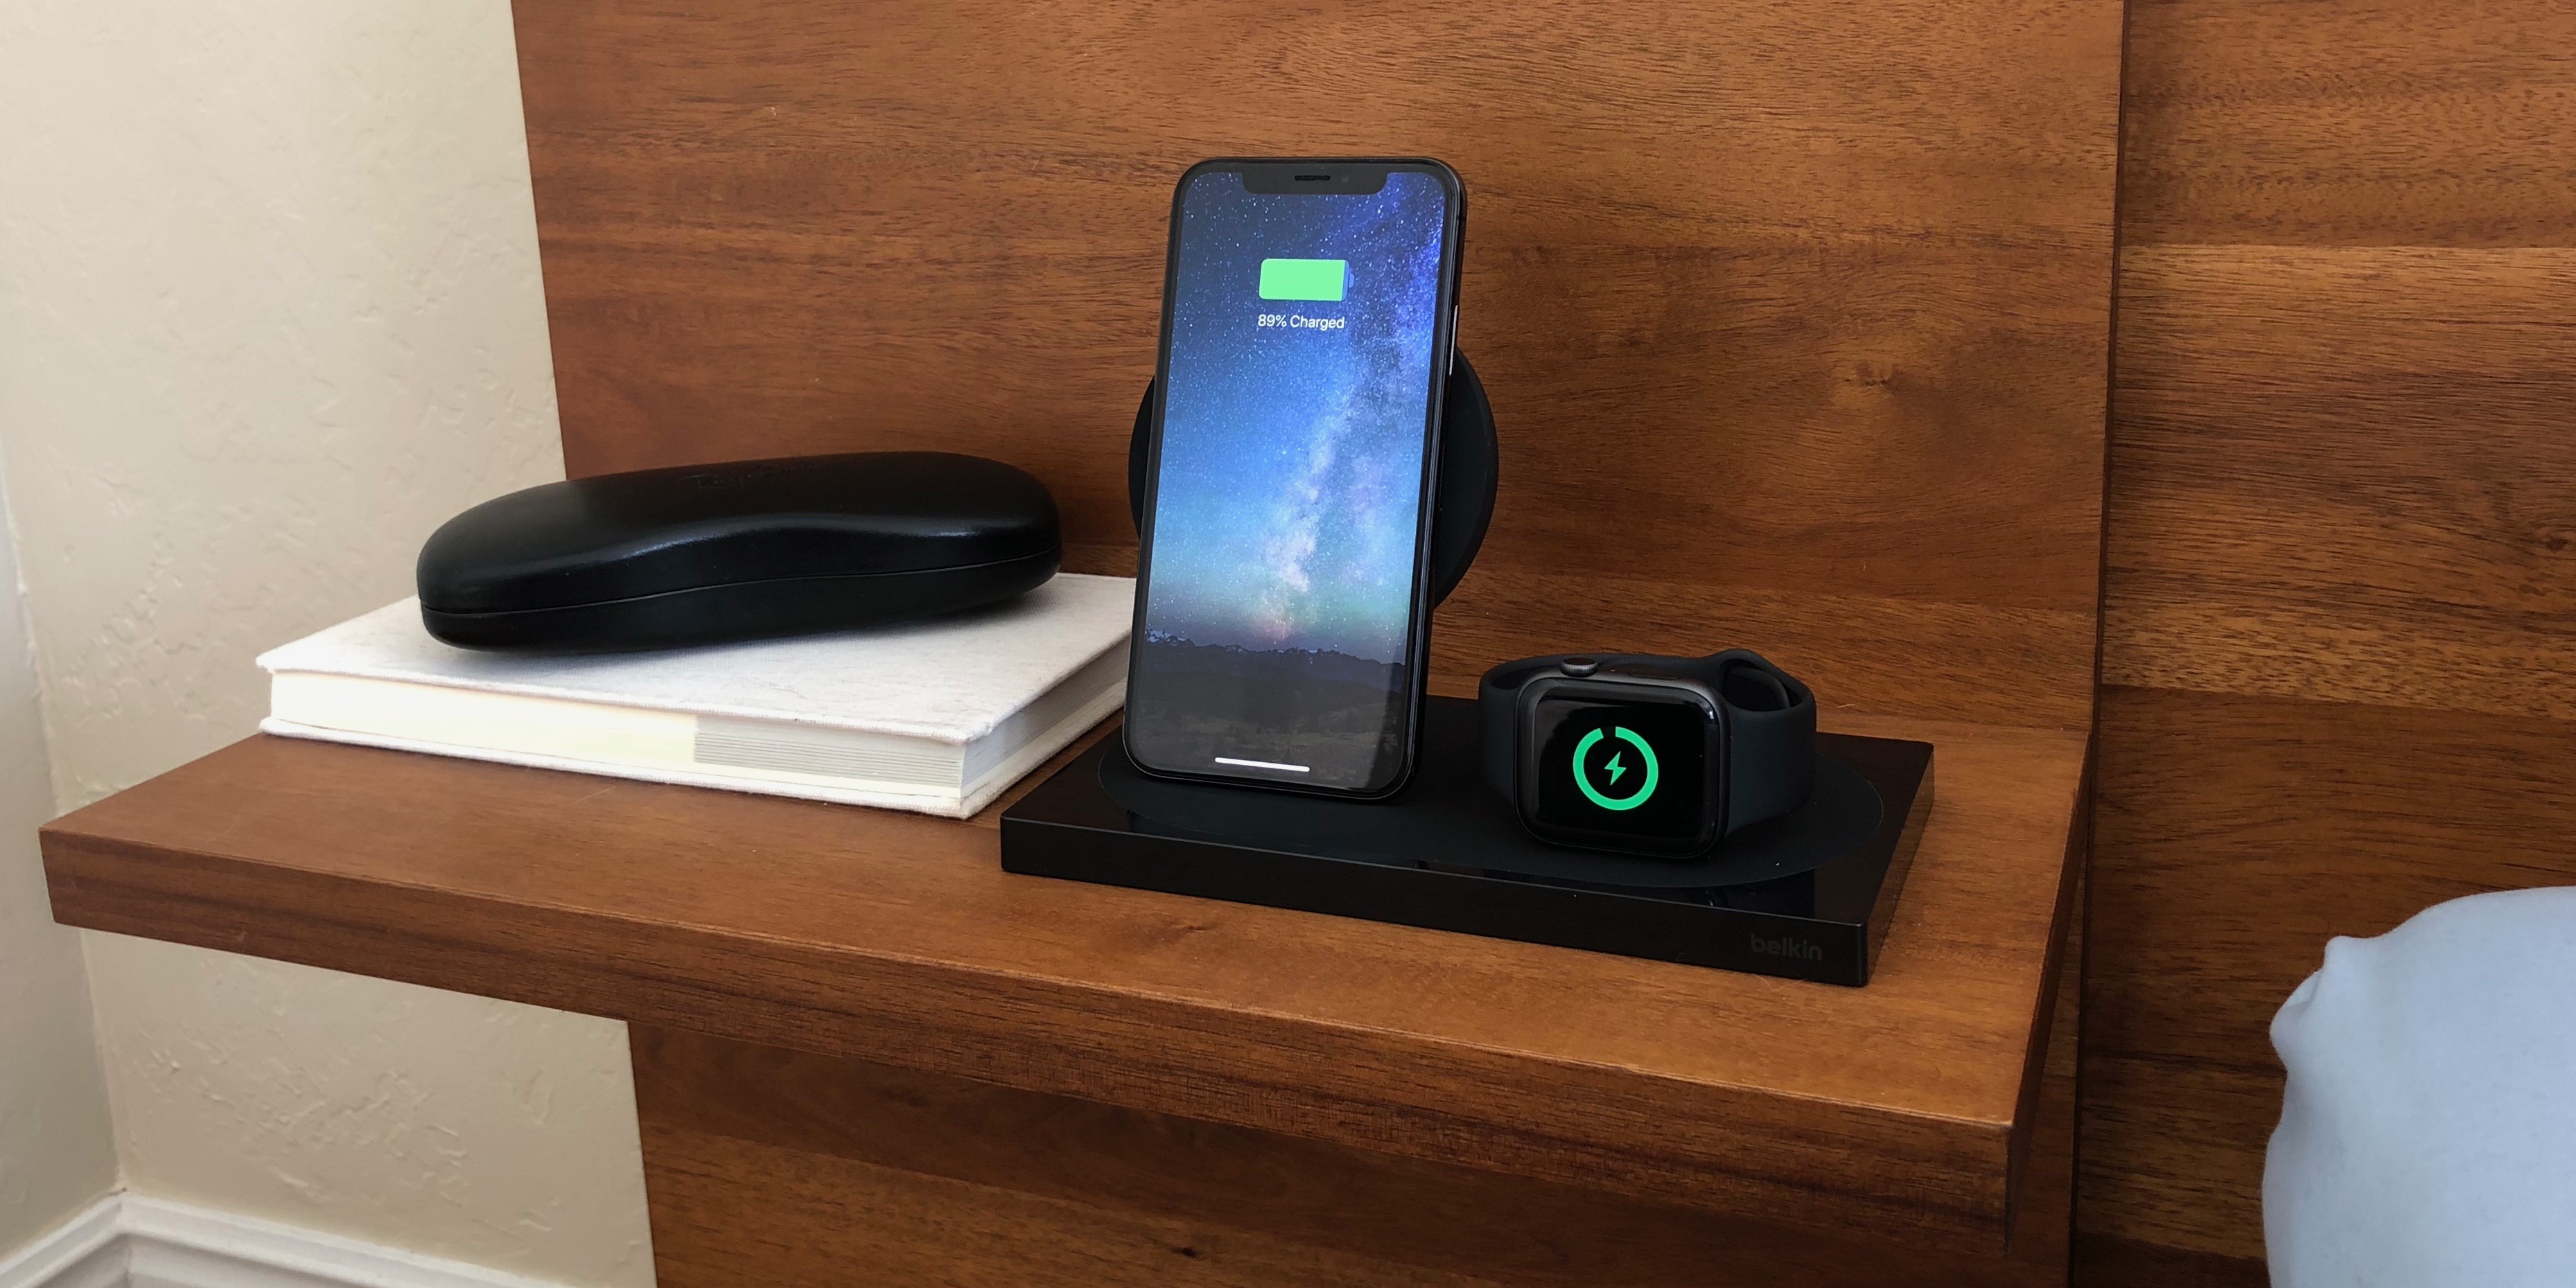 Belkin AirPower wireless charger